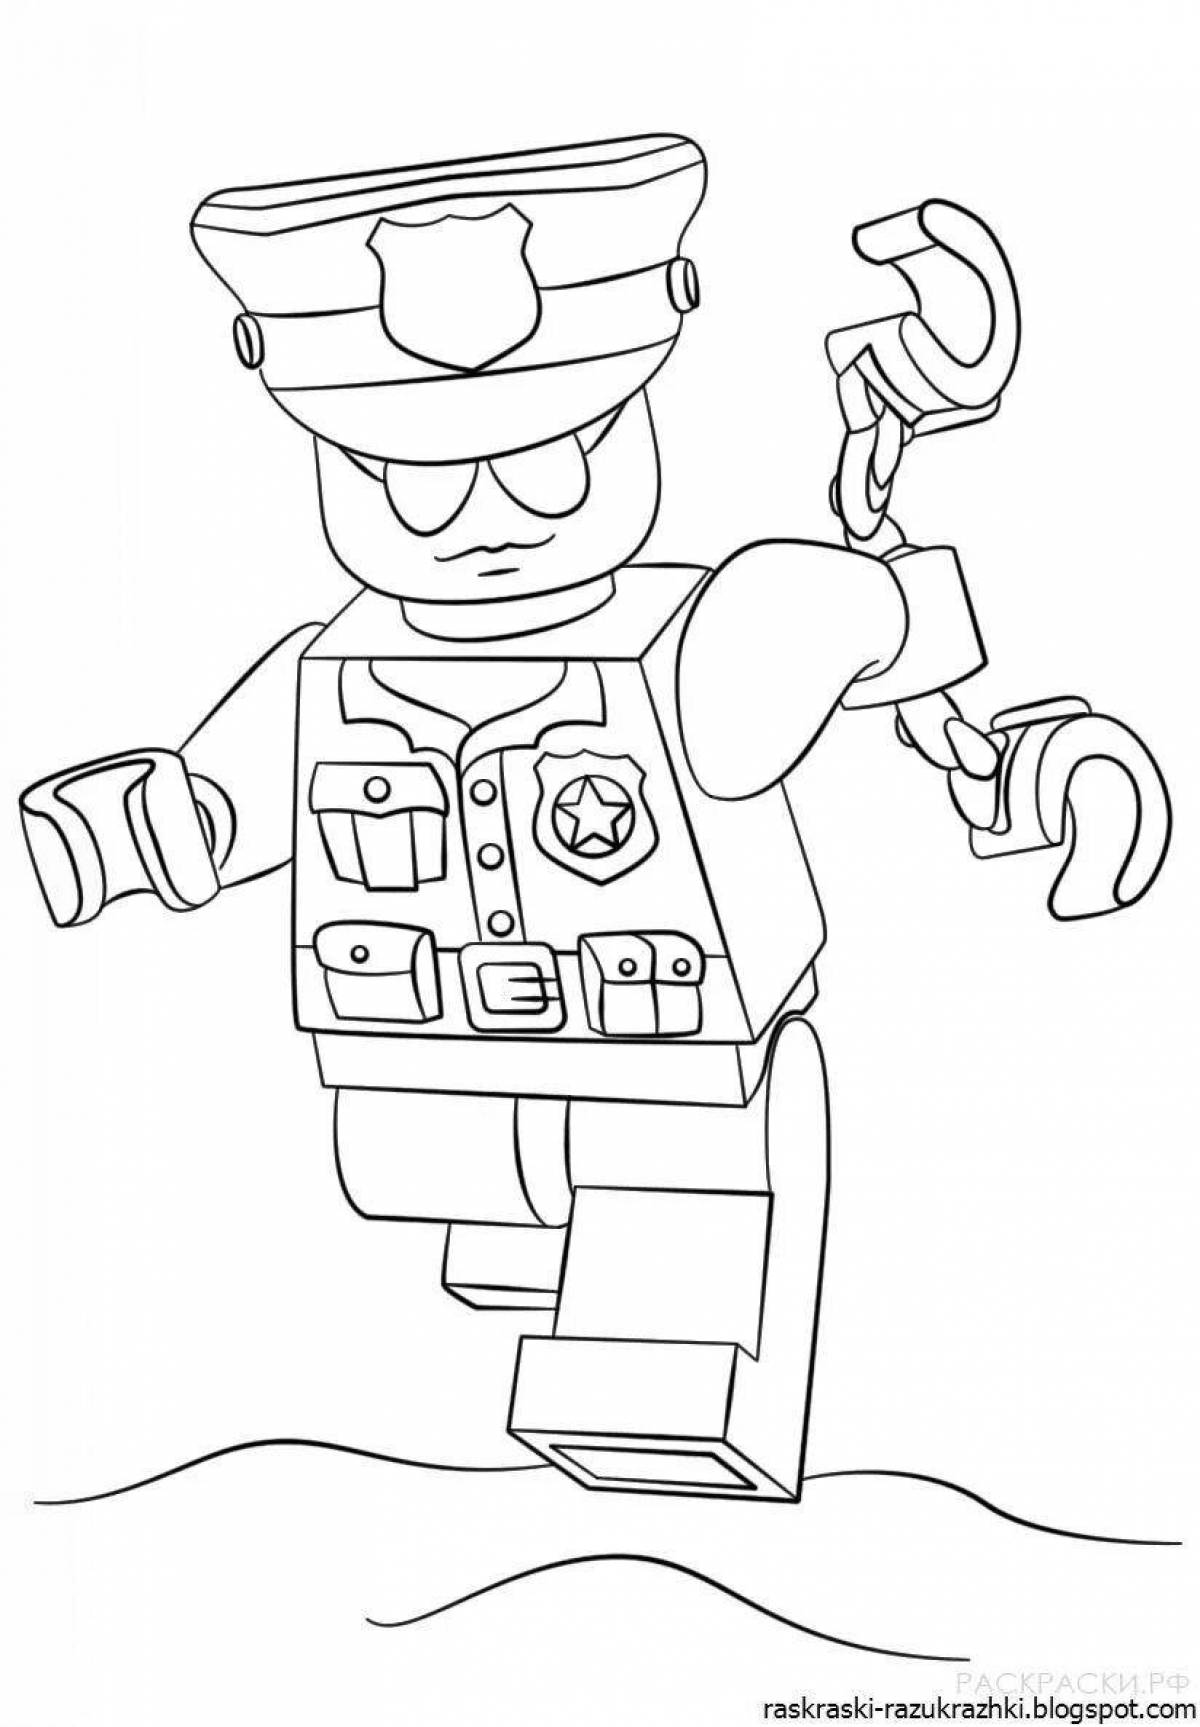 Coloring page charming lego city police